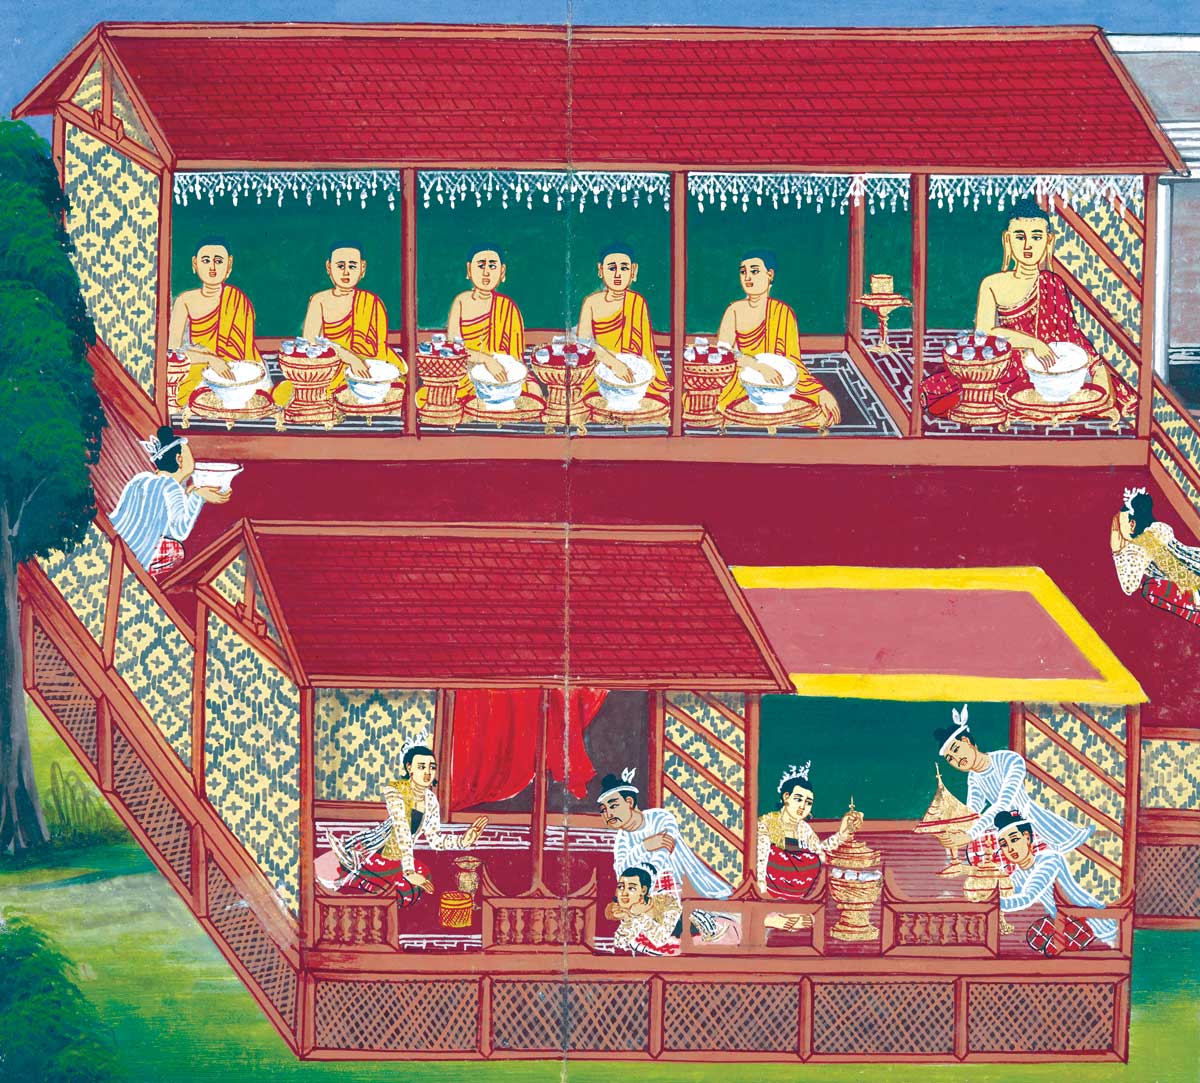 Monks dining with  the Buddha, scenes from The Life of the Buddha, Burmese, c.1800-20.